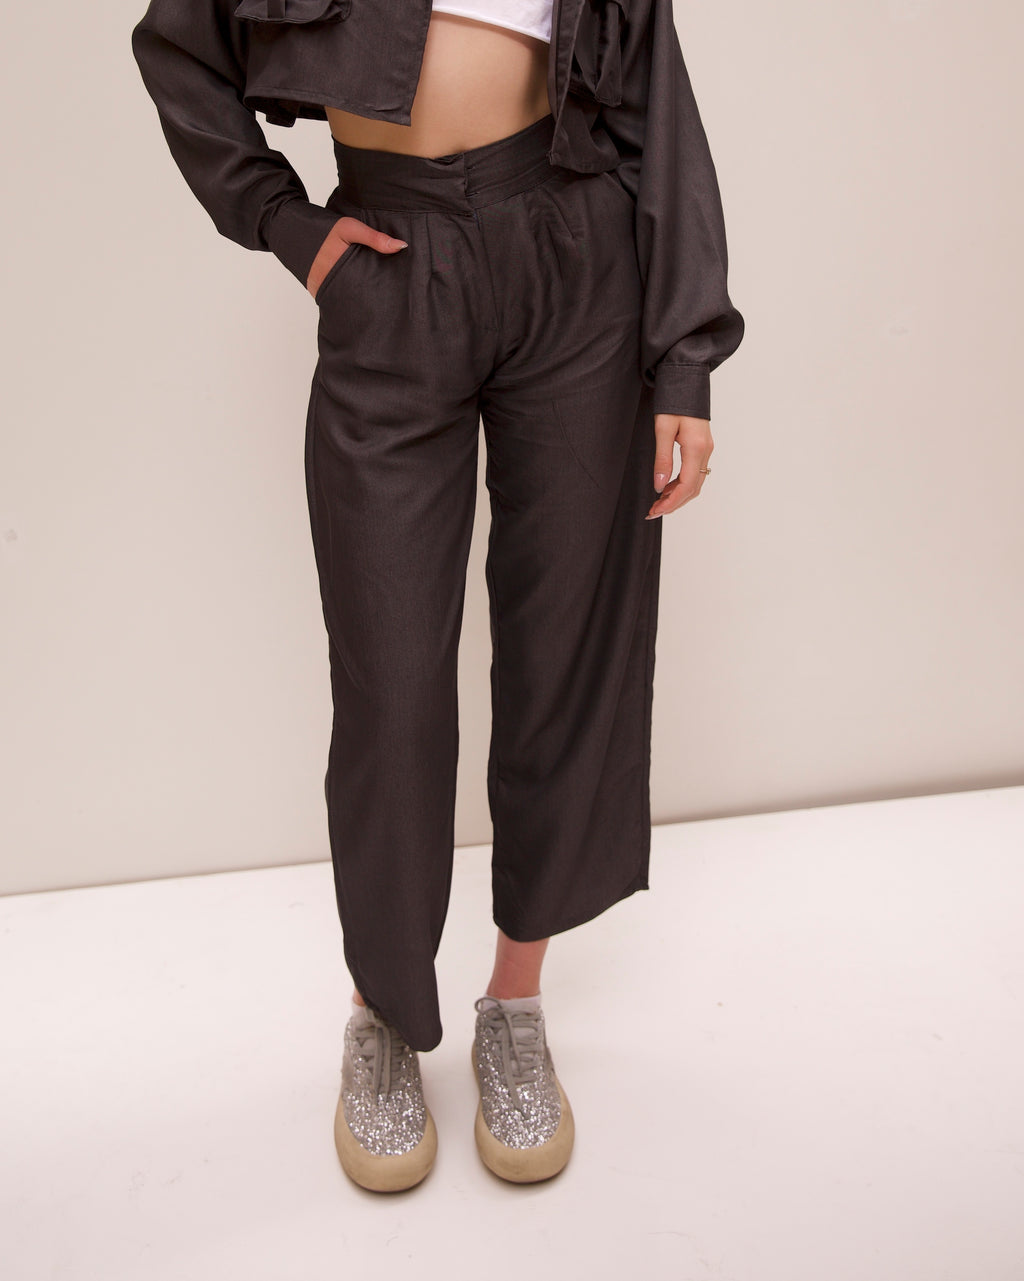 Stand out pants in black